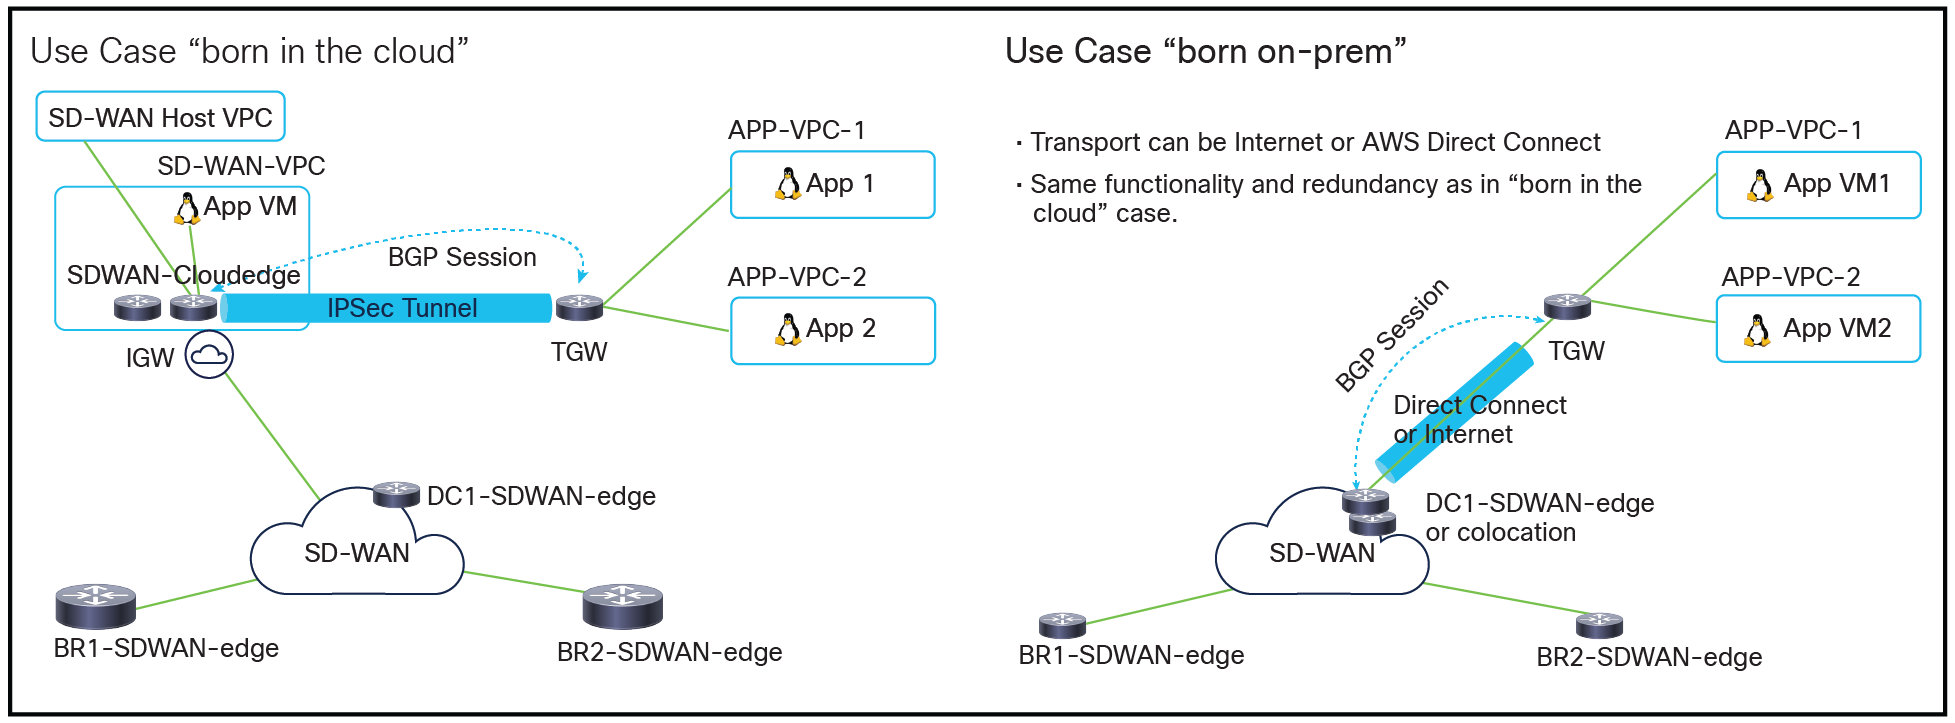 Two main use cases